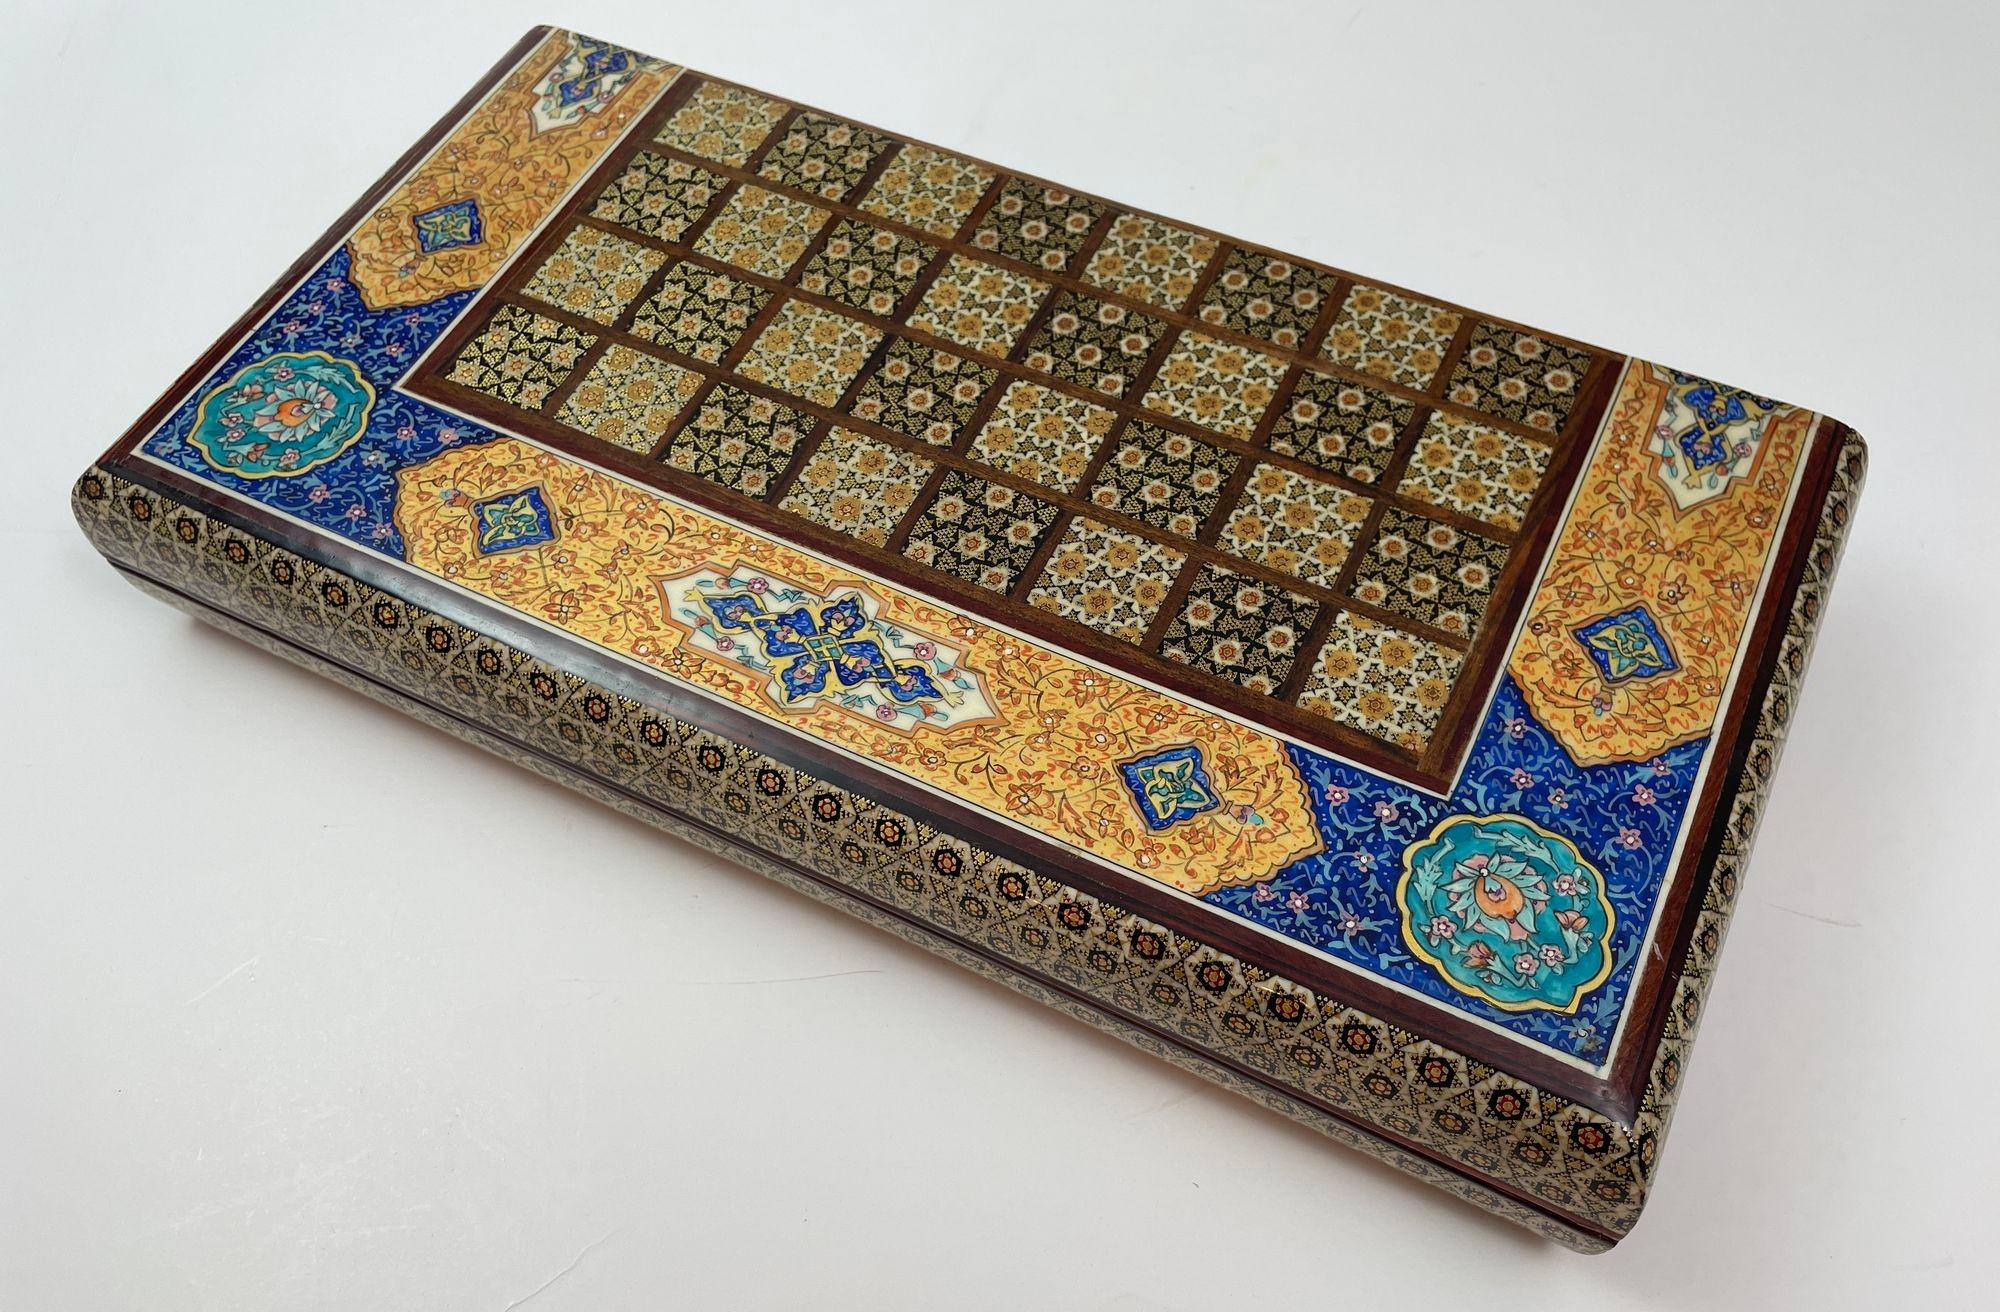 Moroccan Moorish Persian Inlaid Micro Mosaic Backgammon and Chess Board.
Intricately inlaid handcrafted Moorish Persian backgammon and chess checker game box.
Handcrafted beautiful Middle Eastern Khatam wooden box covered with very delicate micro